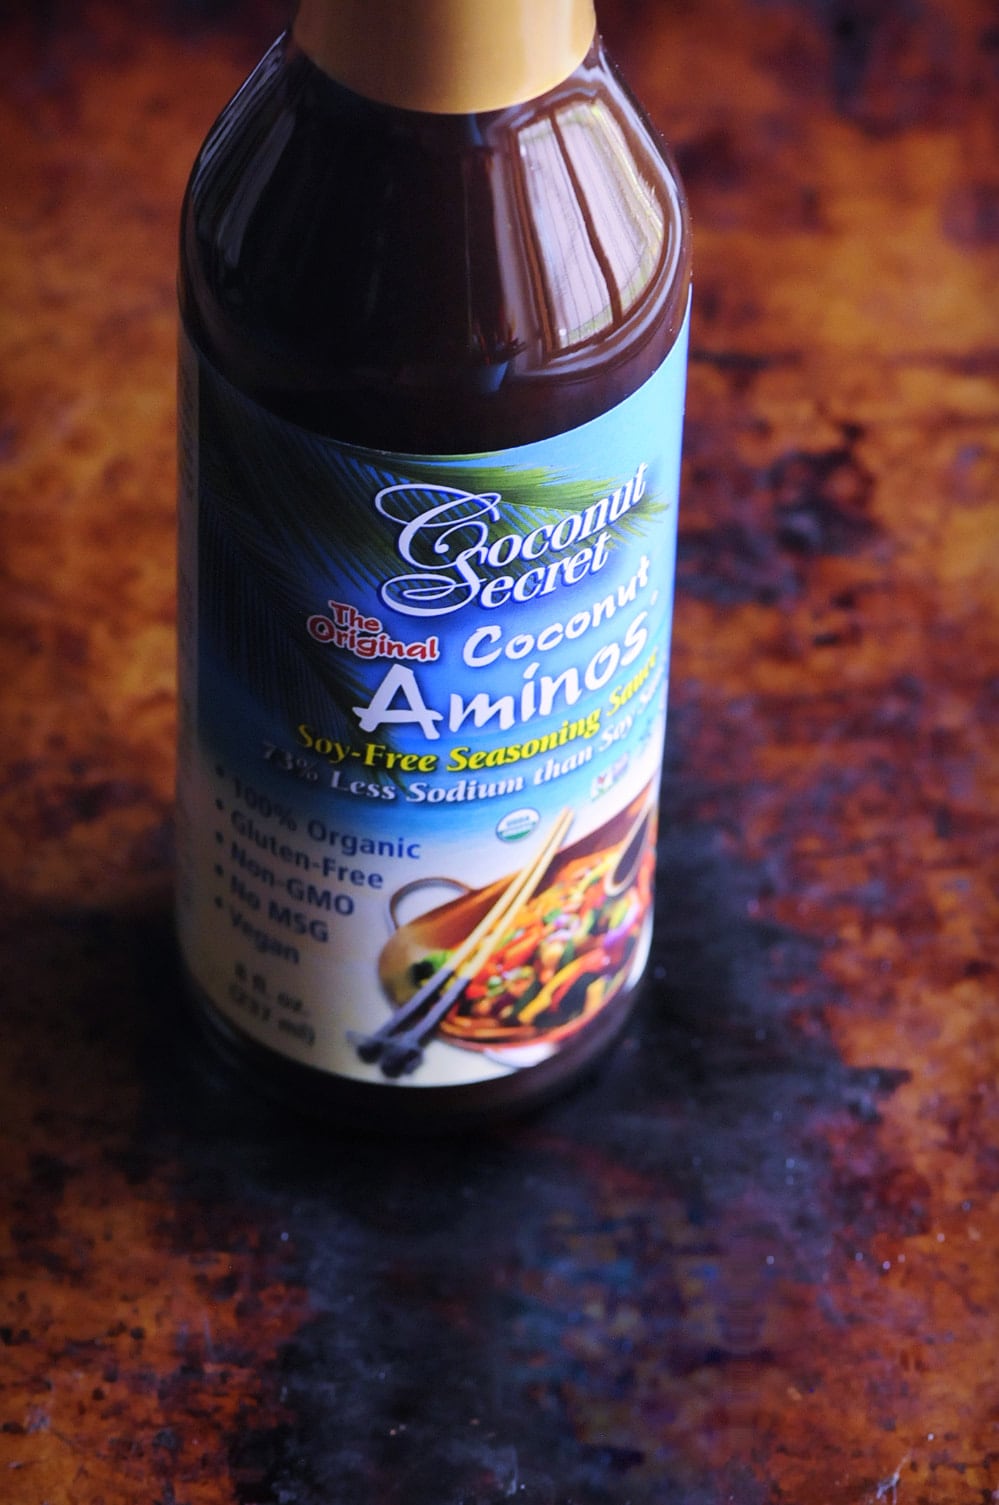  Review: Coconut Secret Coconut Aminos - A product review of Coconut Secret's The Original Coconut Aminos. | #coconut #coconutsecret #coconutaminos #aminos #sauce #dip #condiment #healthy #vegan #organic #review #productreview 